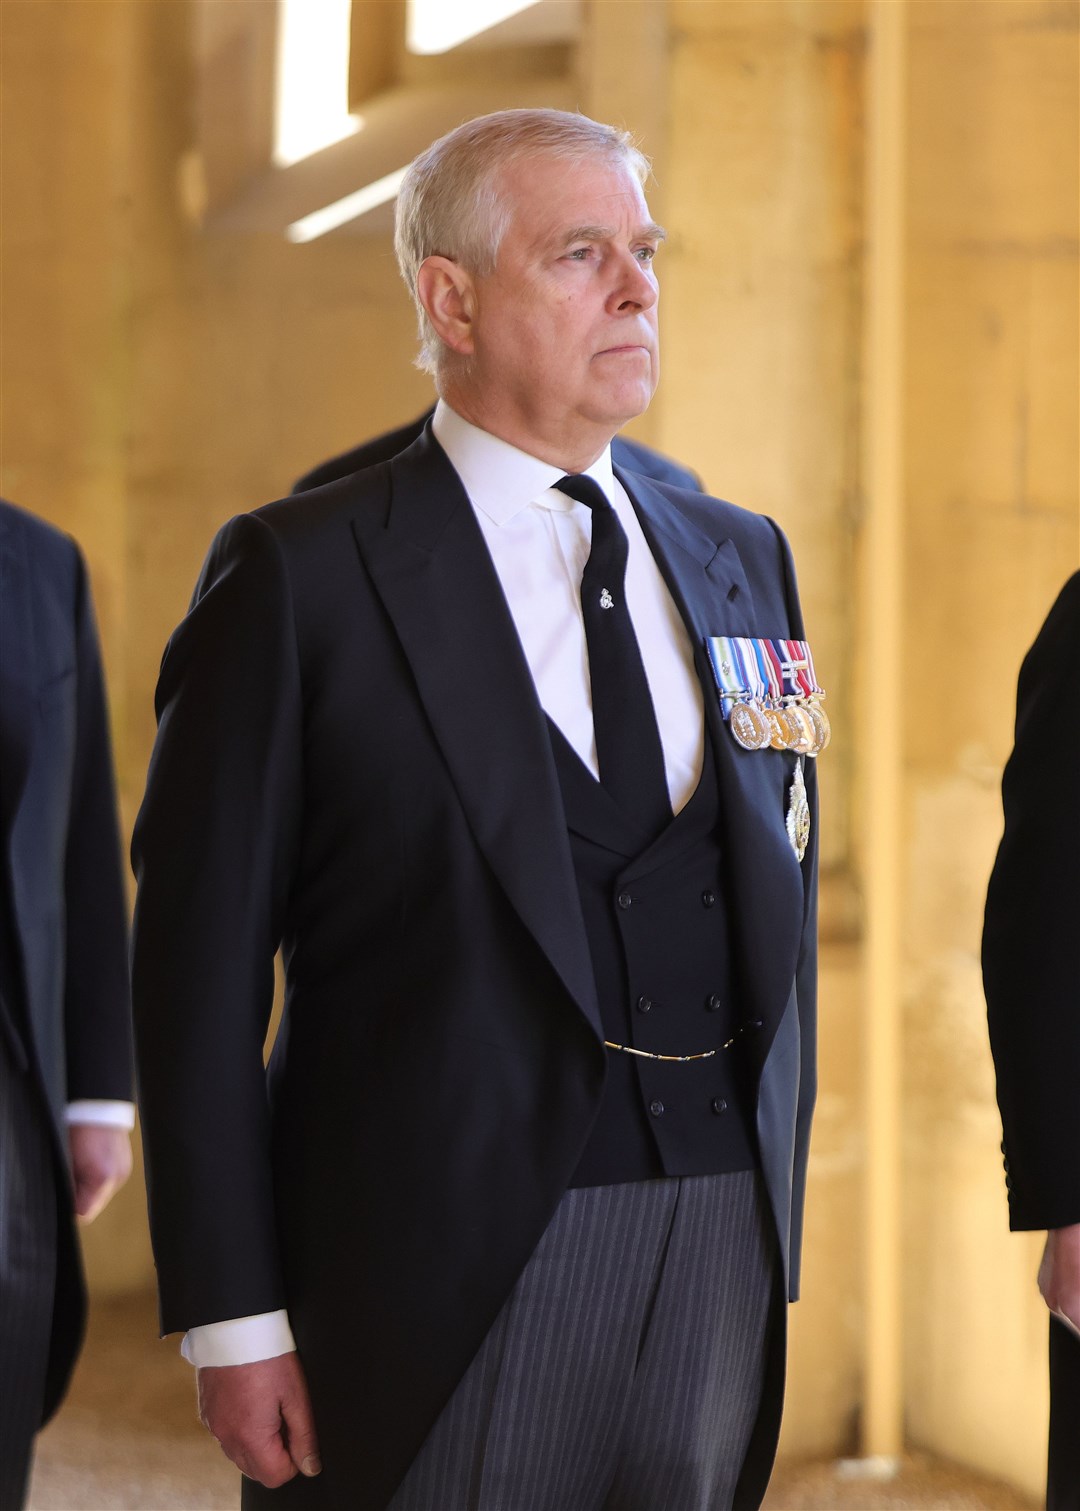 The Duke of York was forced to stay out of sight at the Garter Day procession